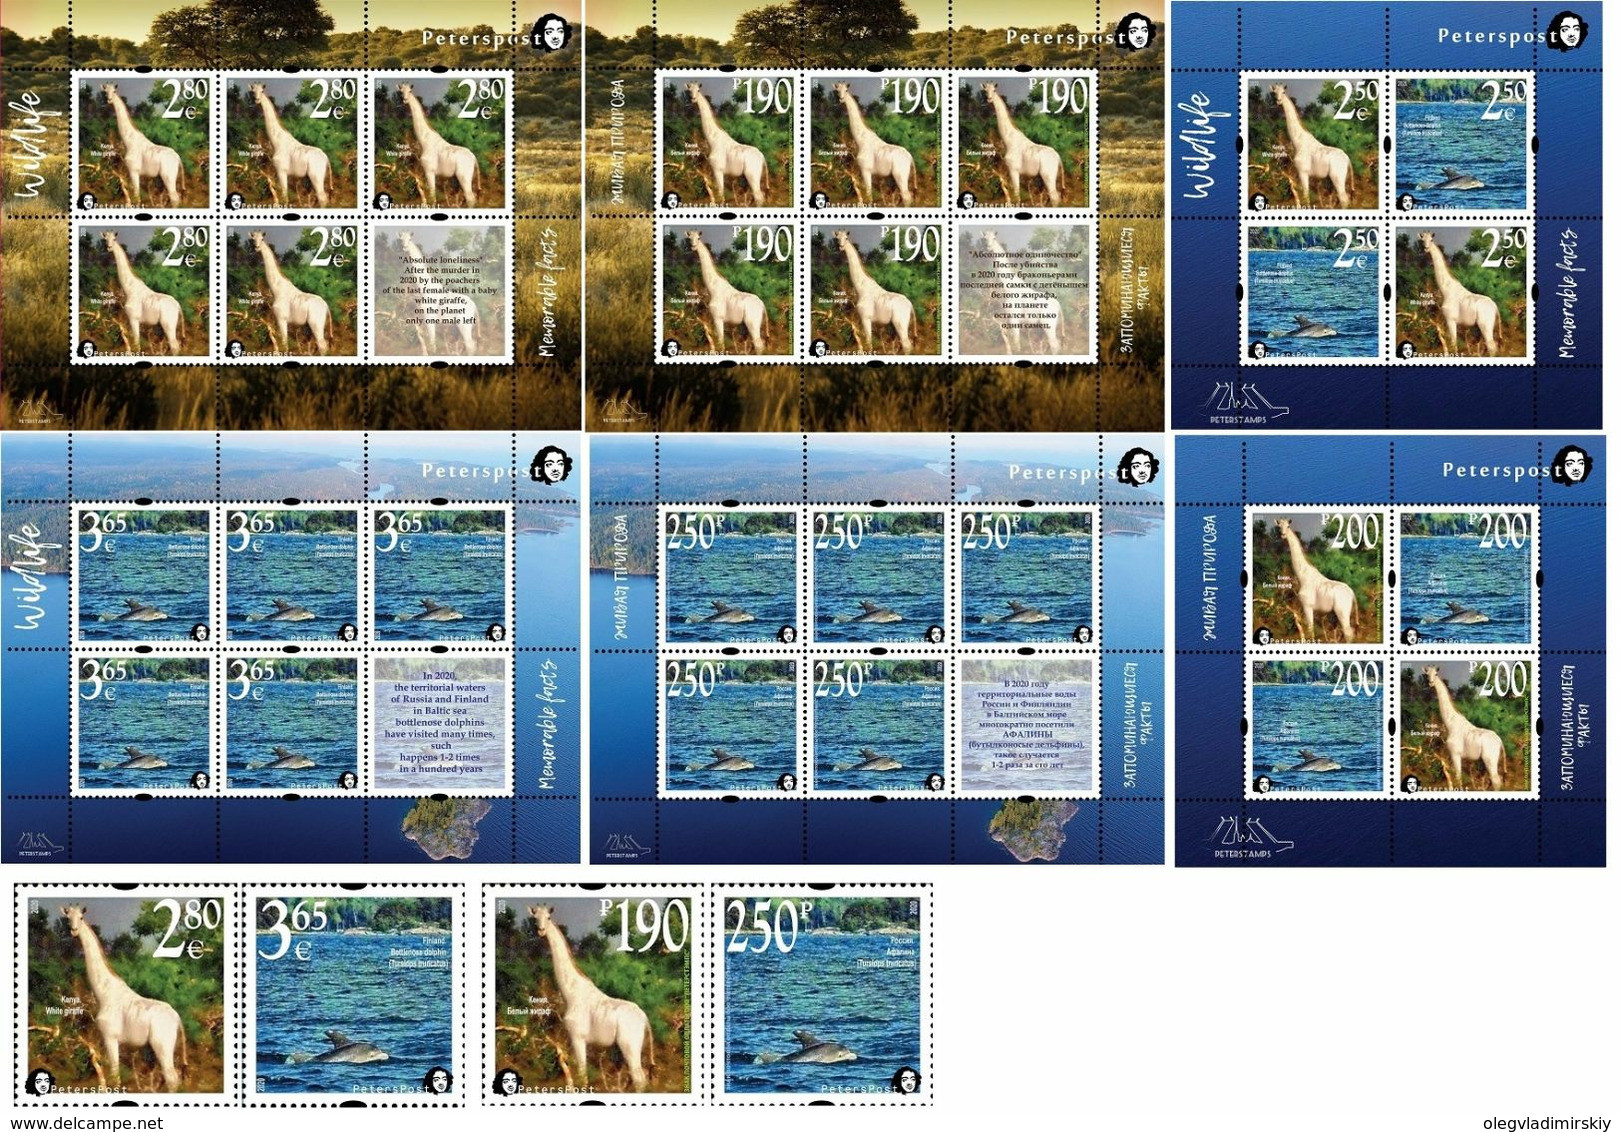 Russia 2020 Peterspost Wild Life "Memorable Facts" White Giraffe And Bottlenose Dolphin Full Issue Set - Giraffes